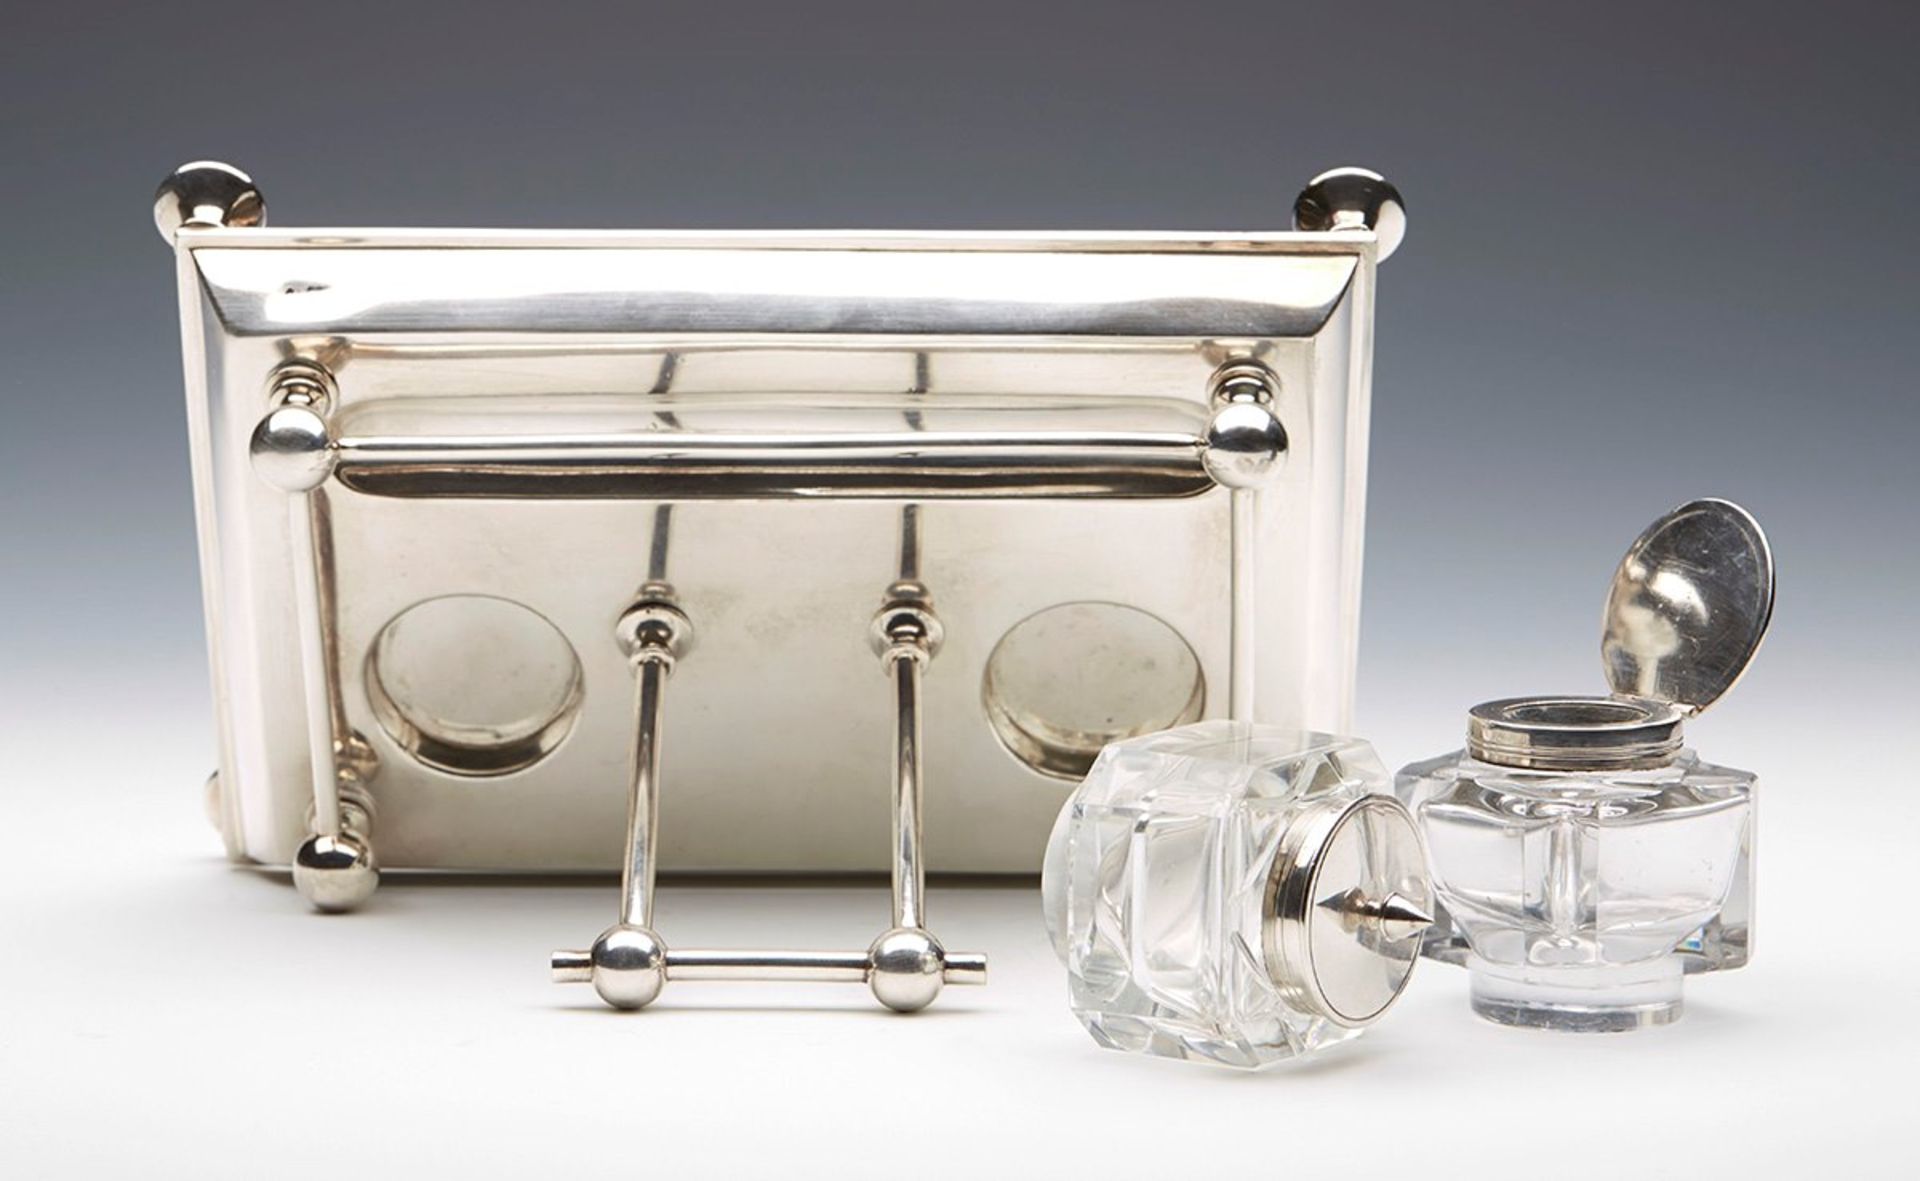 Arts & Crafts Walker & Hall Silver Plated Inkstand C.1890 - Image 8 of 8